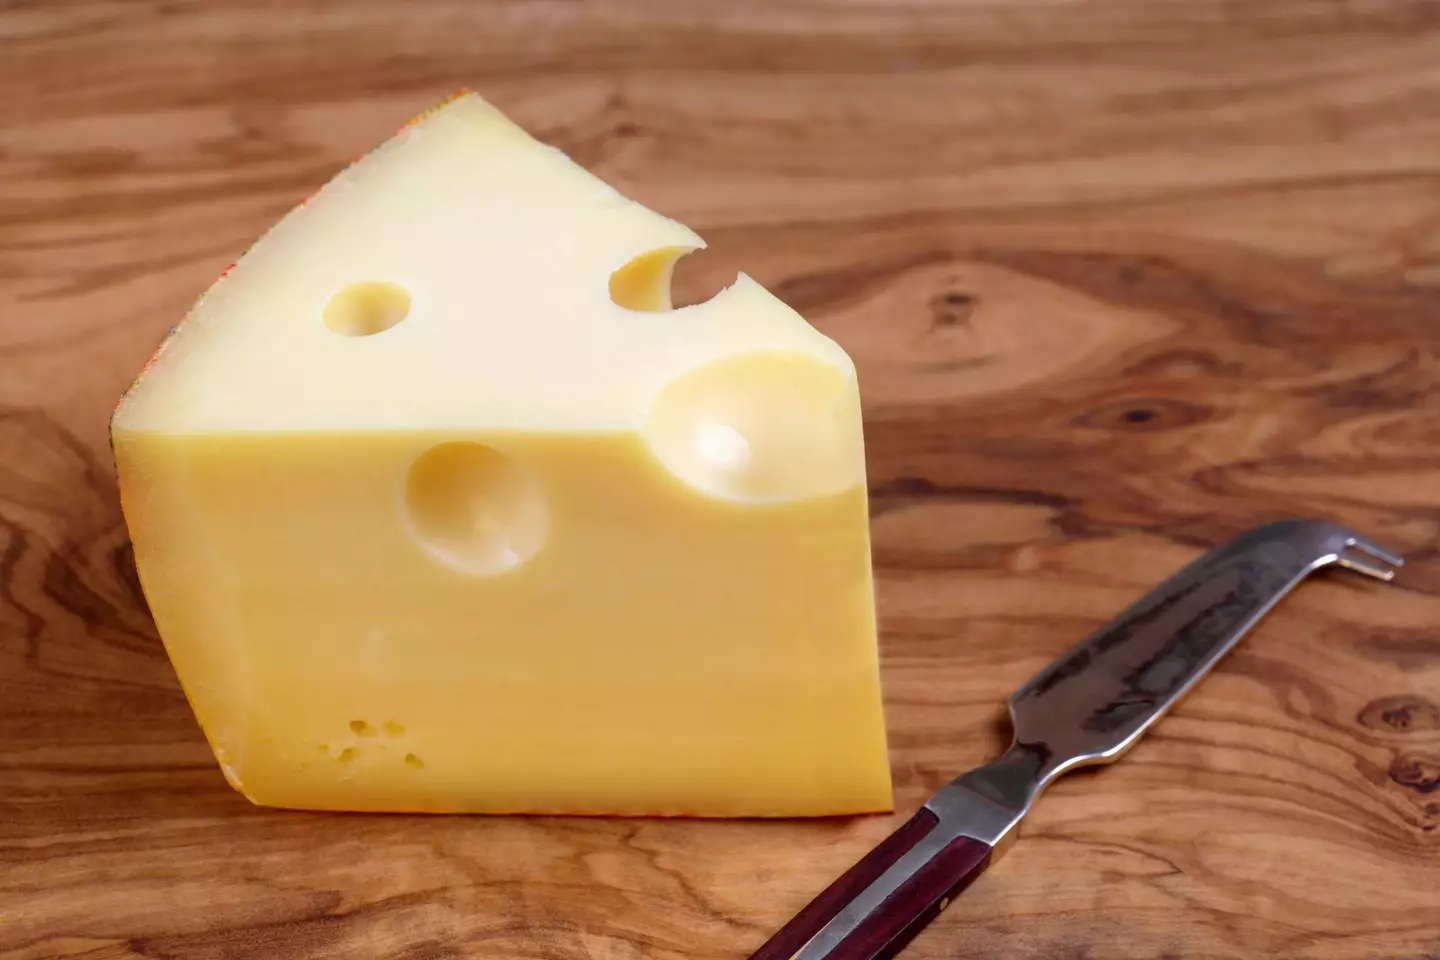 Swiss Cheese is recognized thanks to its holes.